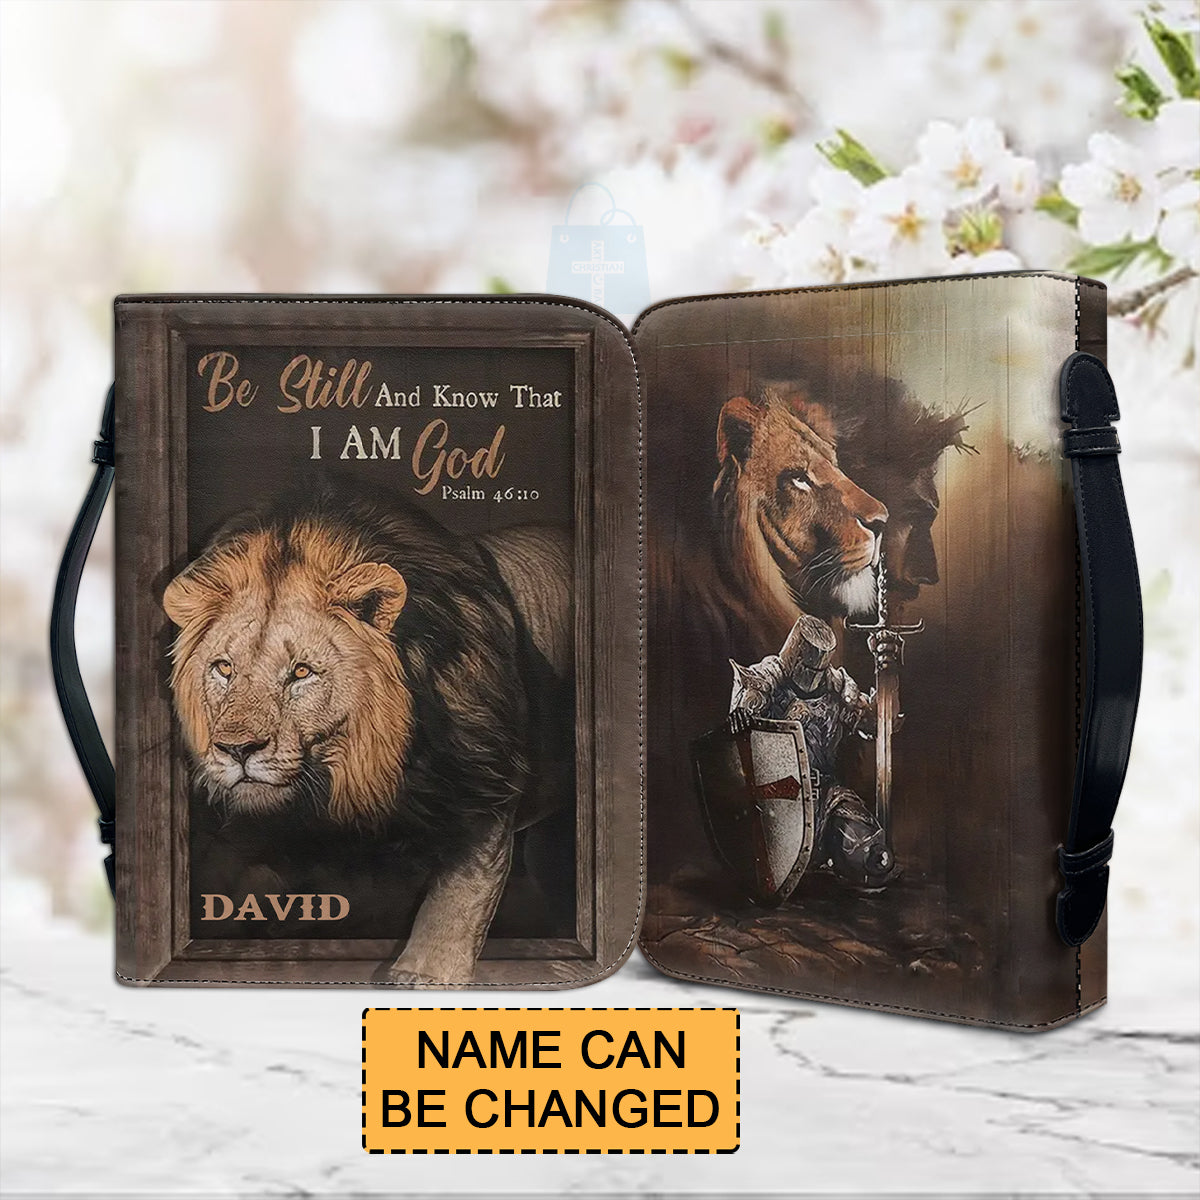 Christianartbag Bible Cover, Be Still And Know That I Am GOD Bible Cover, Personalized Bible Cover, Bible Cover For Men, Christian Gifts, CAB01061023. - Christian Art Bag